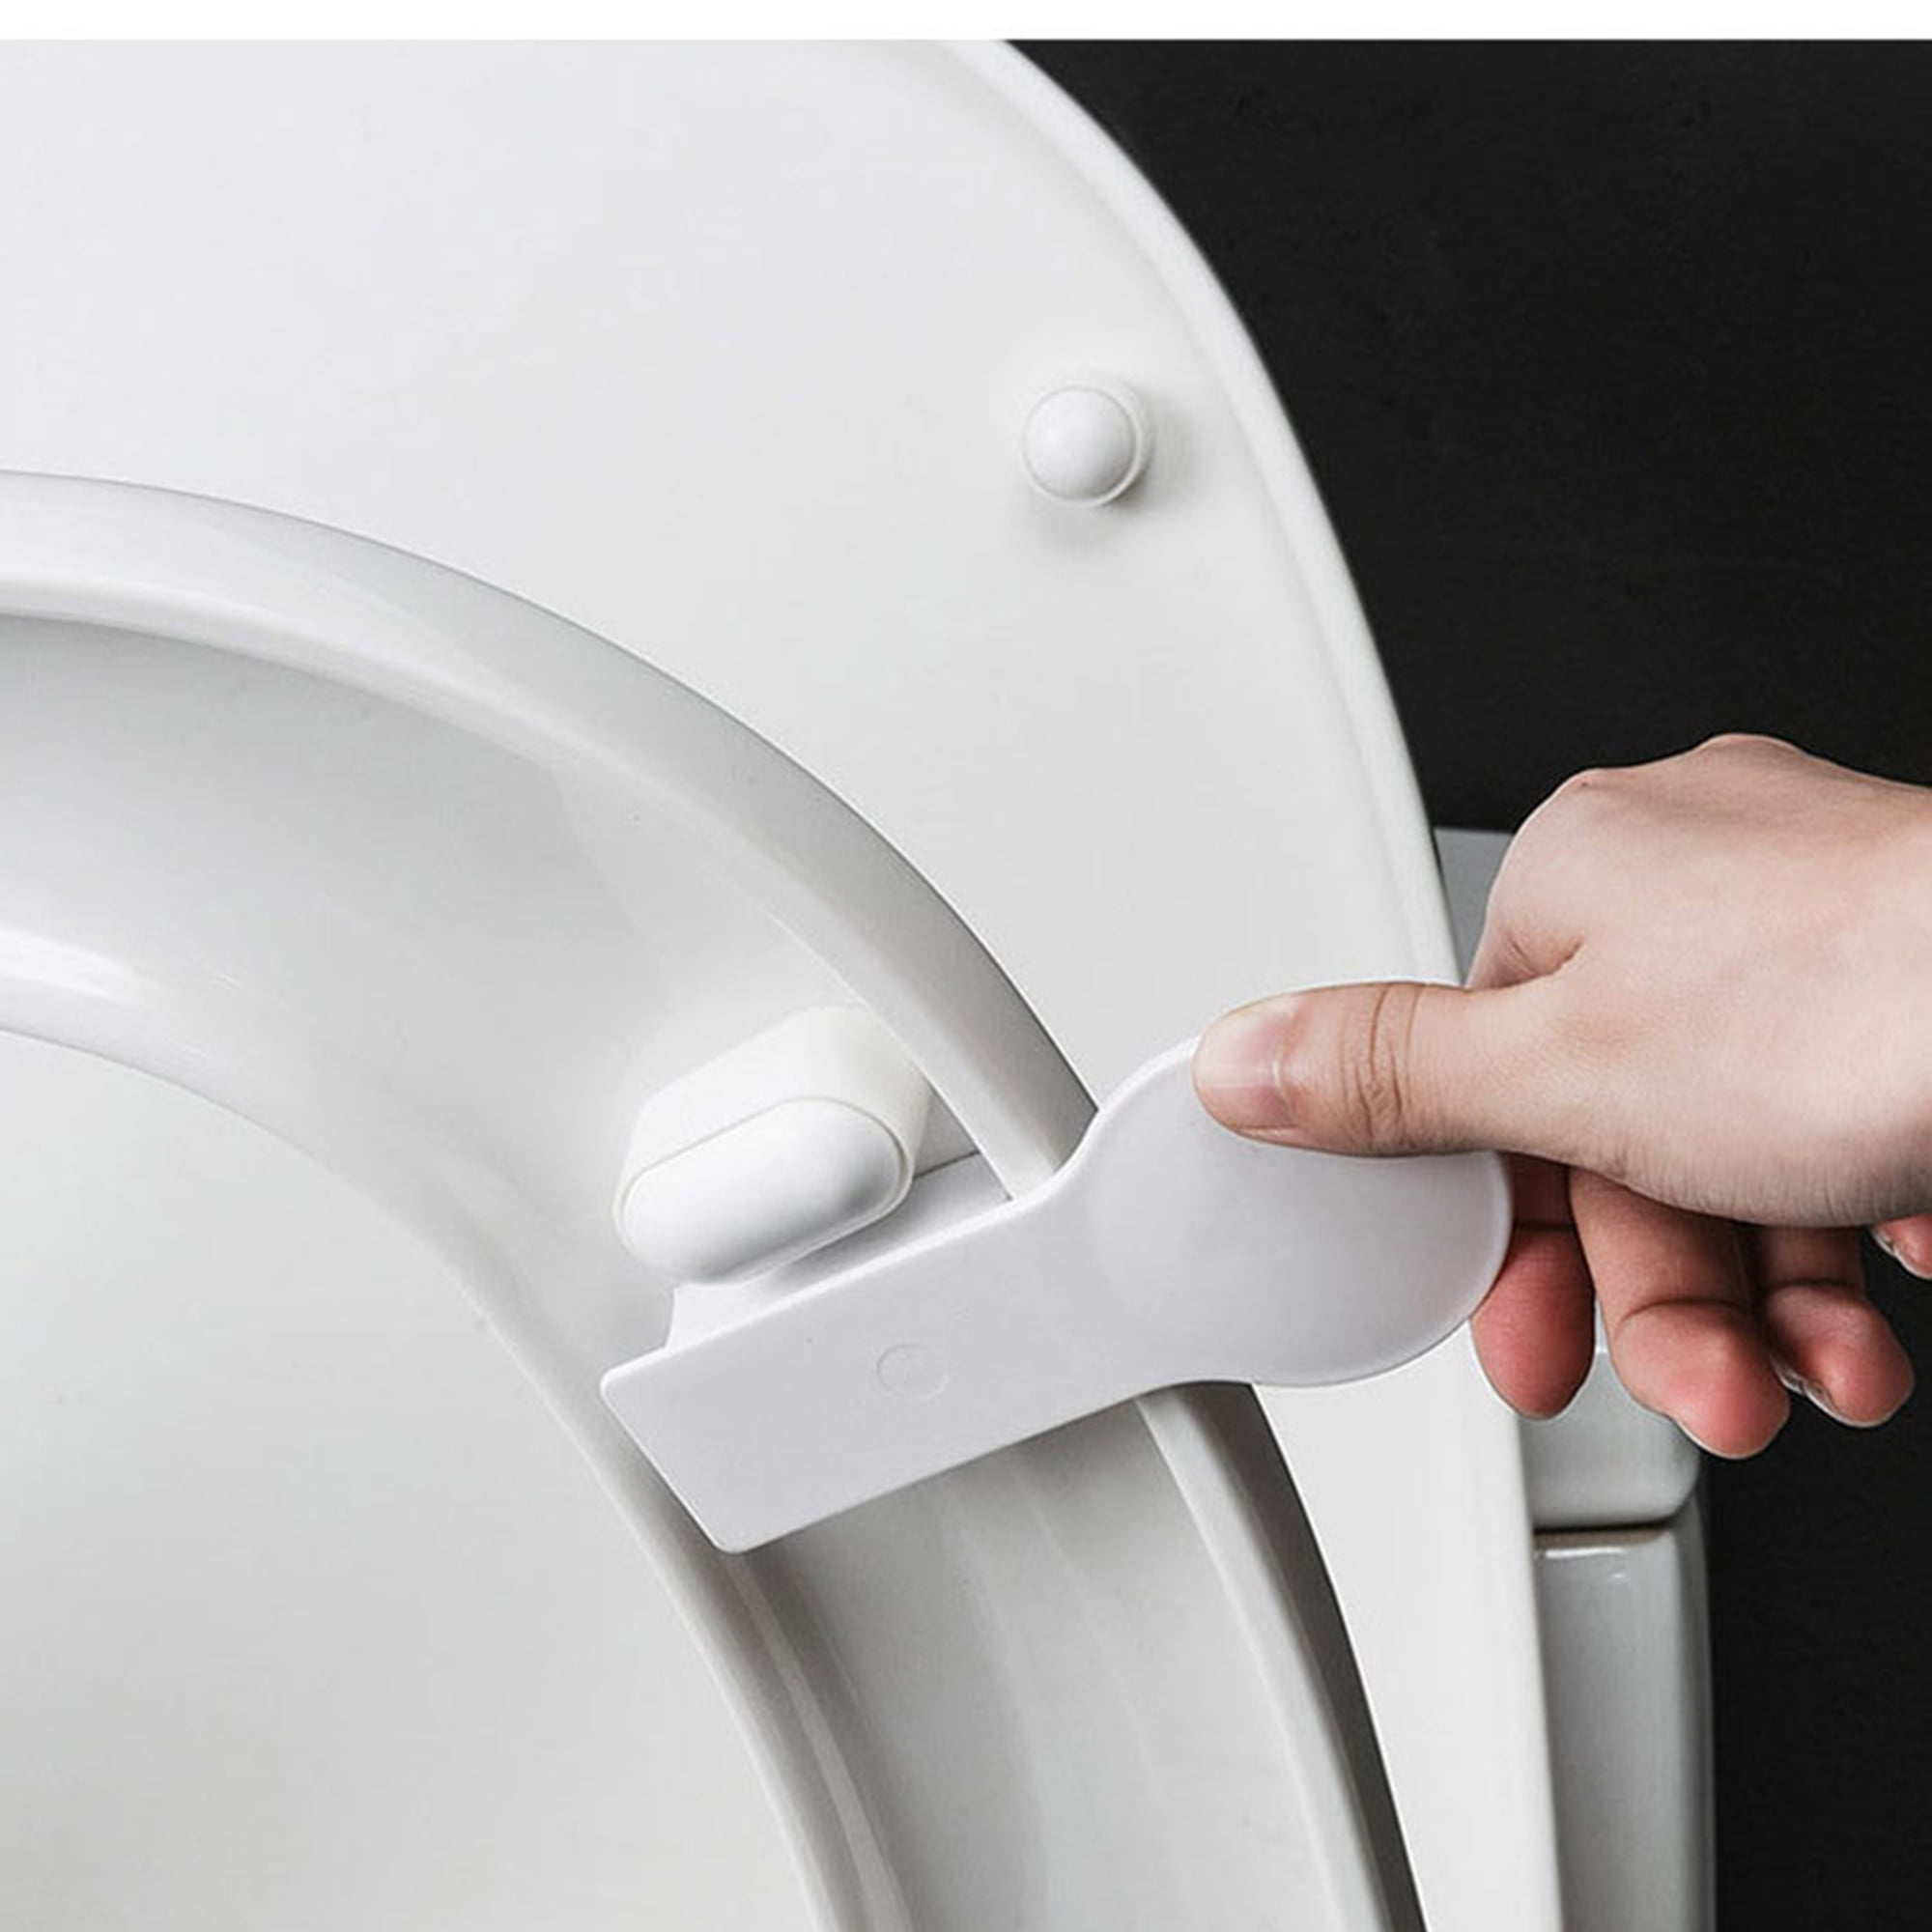 BJ Details about   1pc Foldable Toilet Seat Cover Lifter Sanitary Closestool Seat Cover Handle 